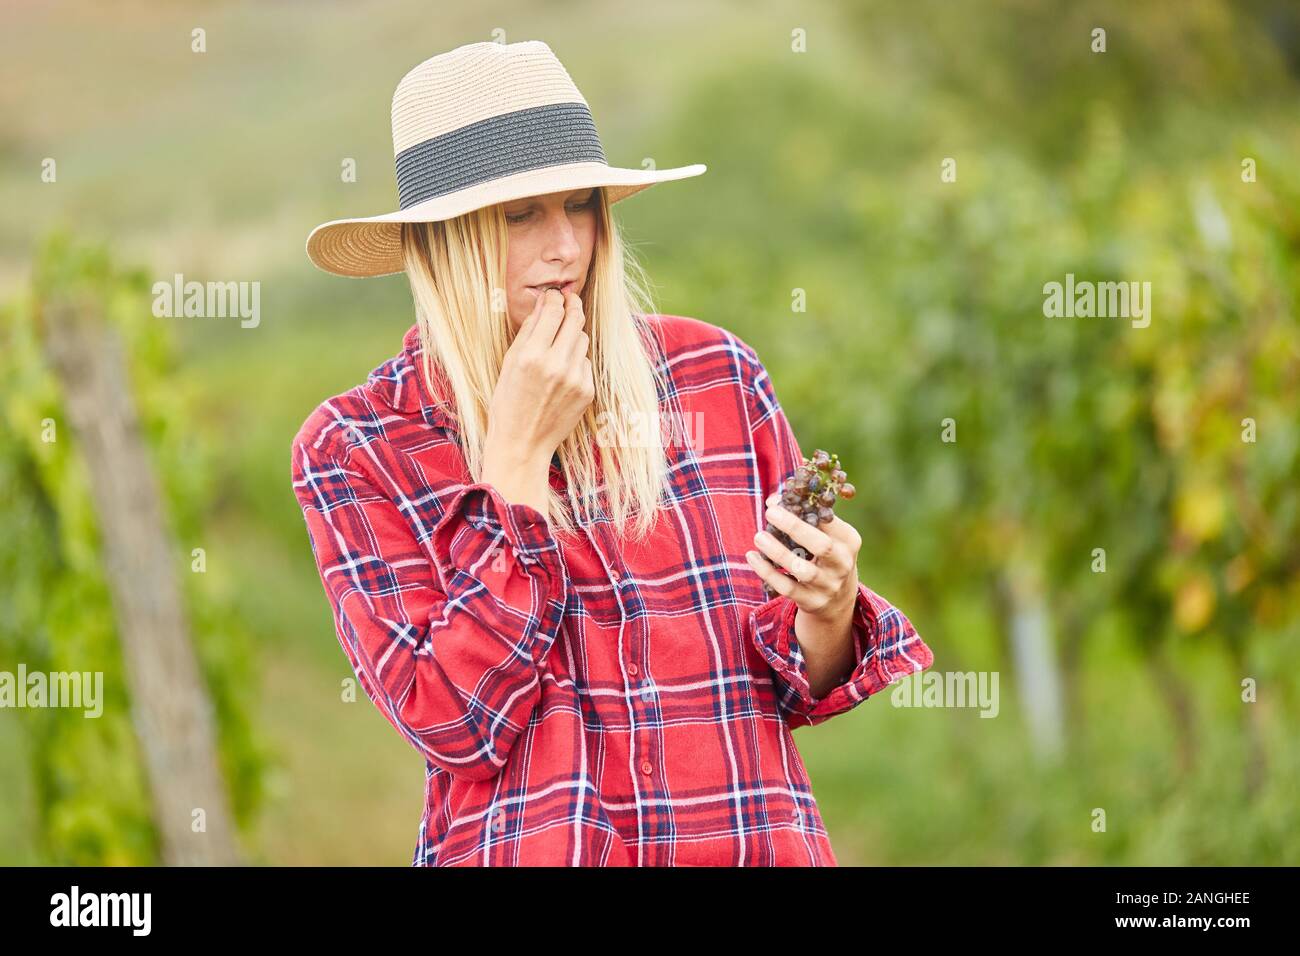 Young woman as a winemaker tries red grapes and checks the maturity level Stock Photo